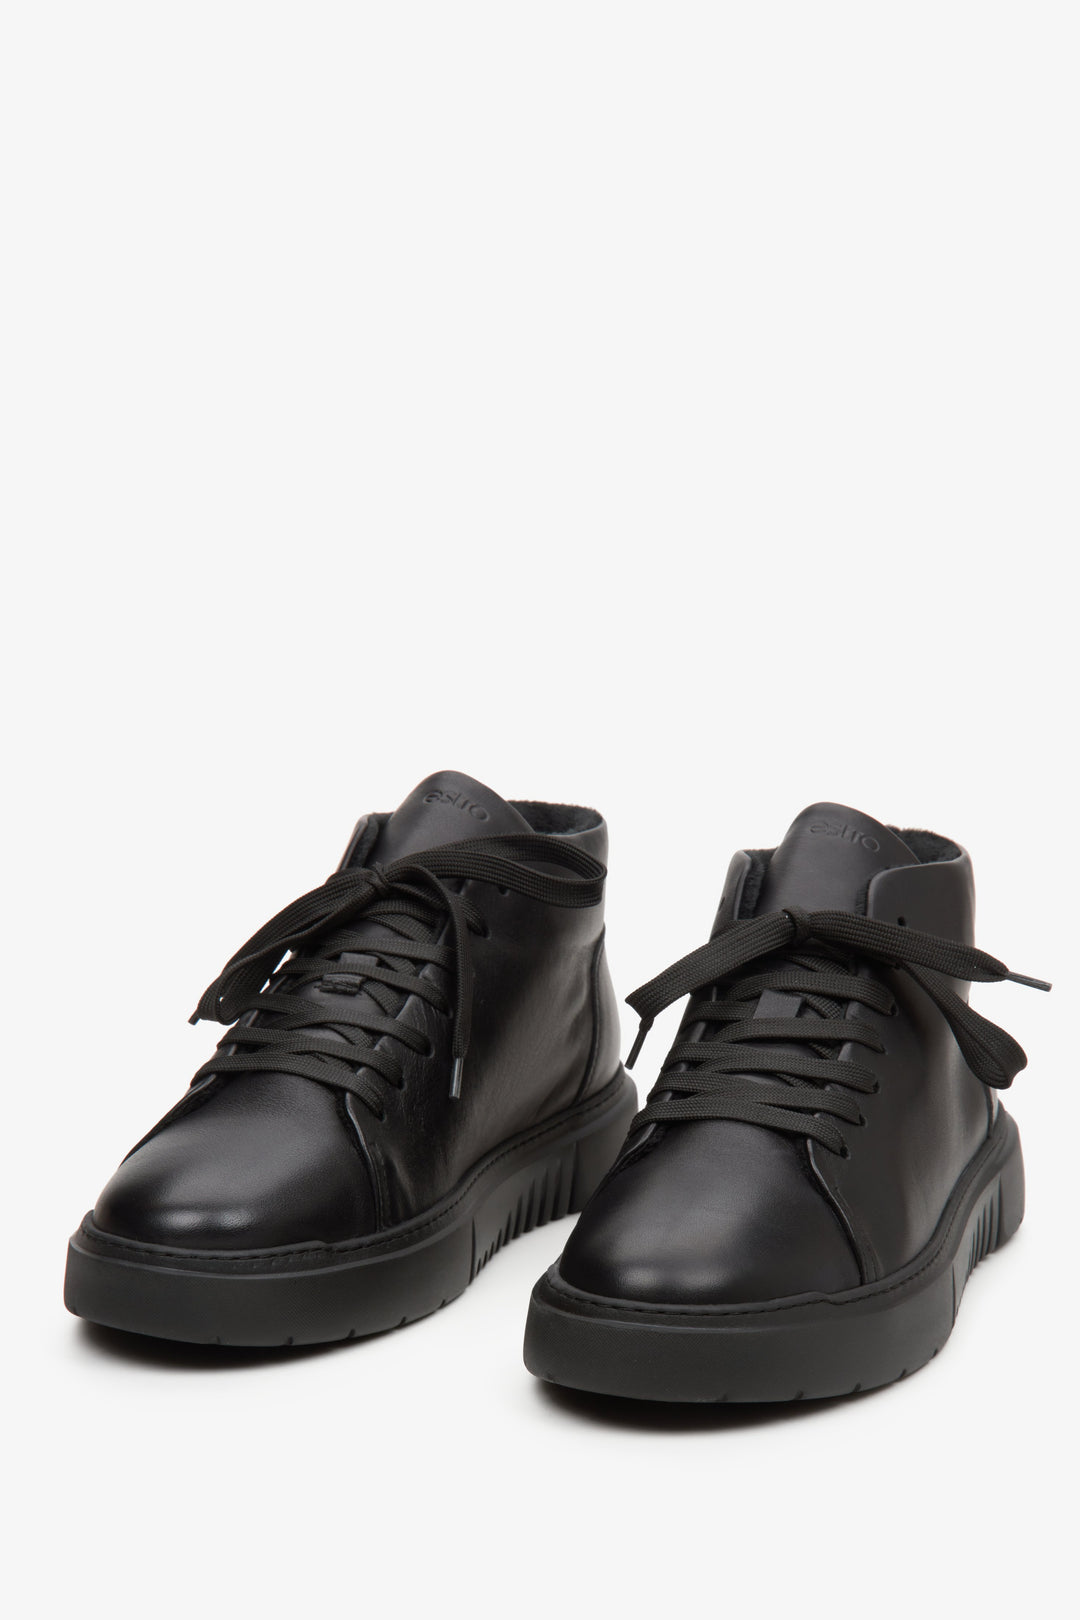 High-top men's black leather  sneakers by Estro - footwear presentation from the front.